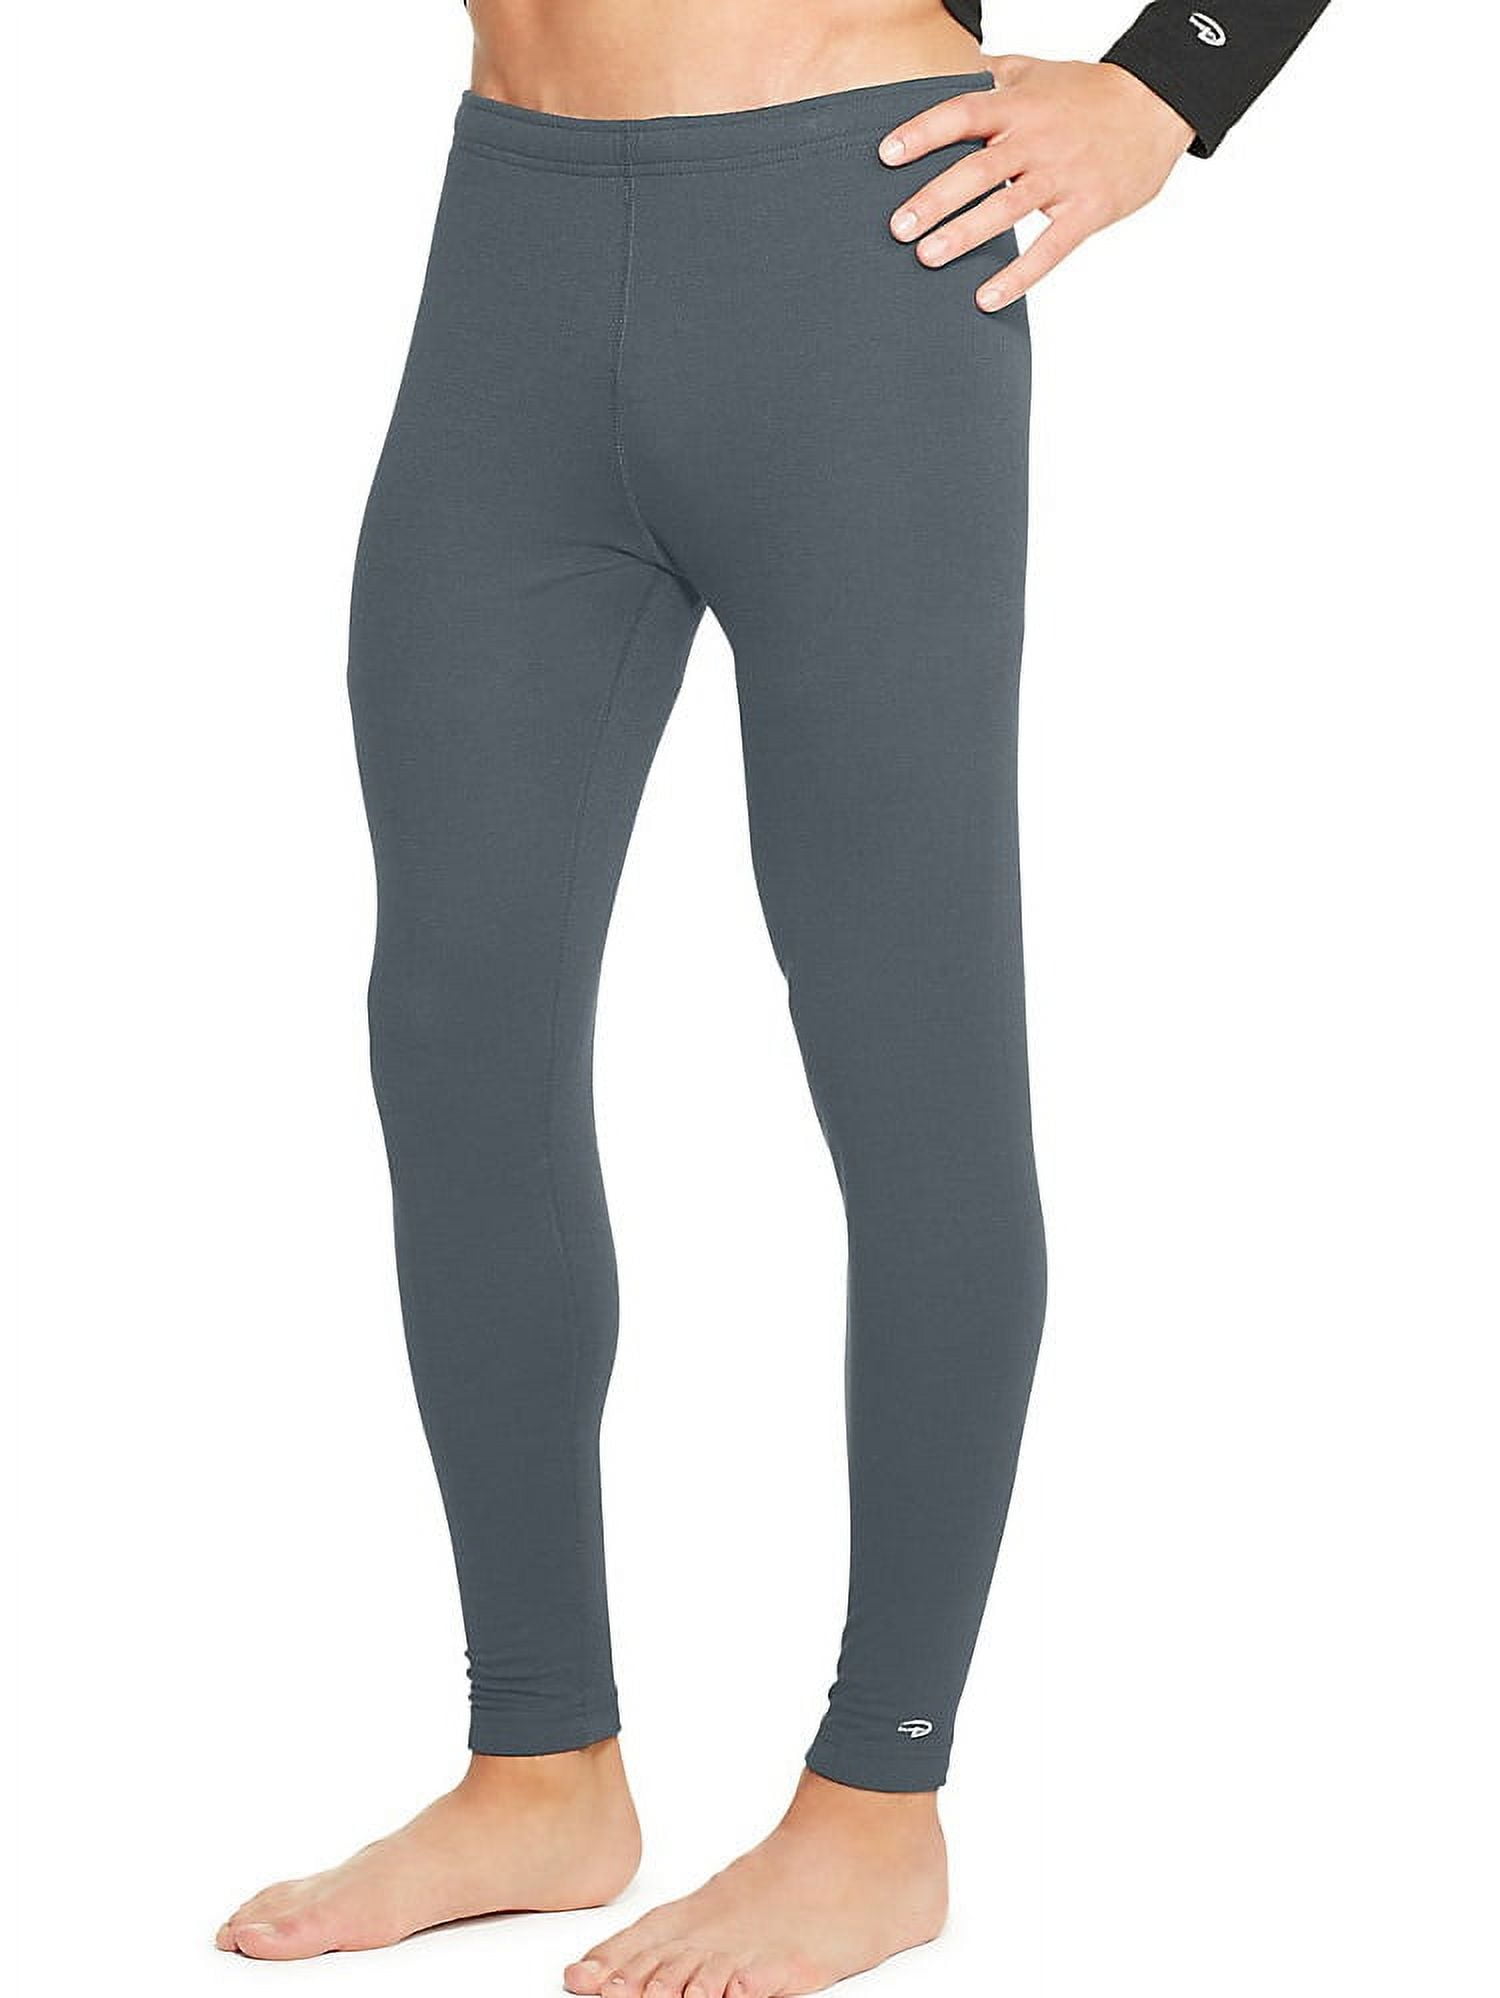 Stay warm and stylish with our Duofold KMW2 Thermal Pant